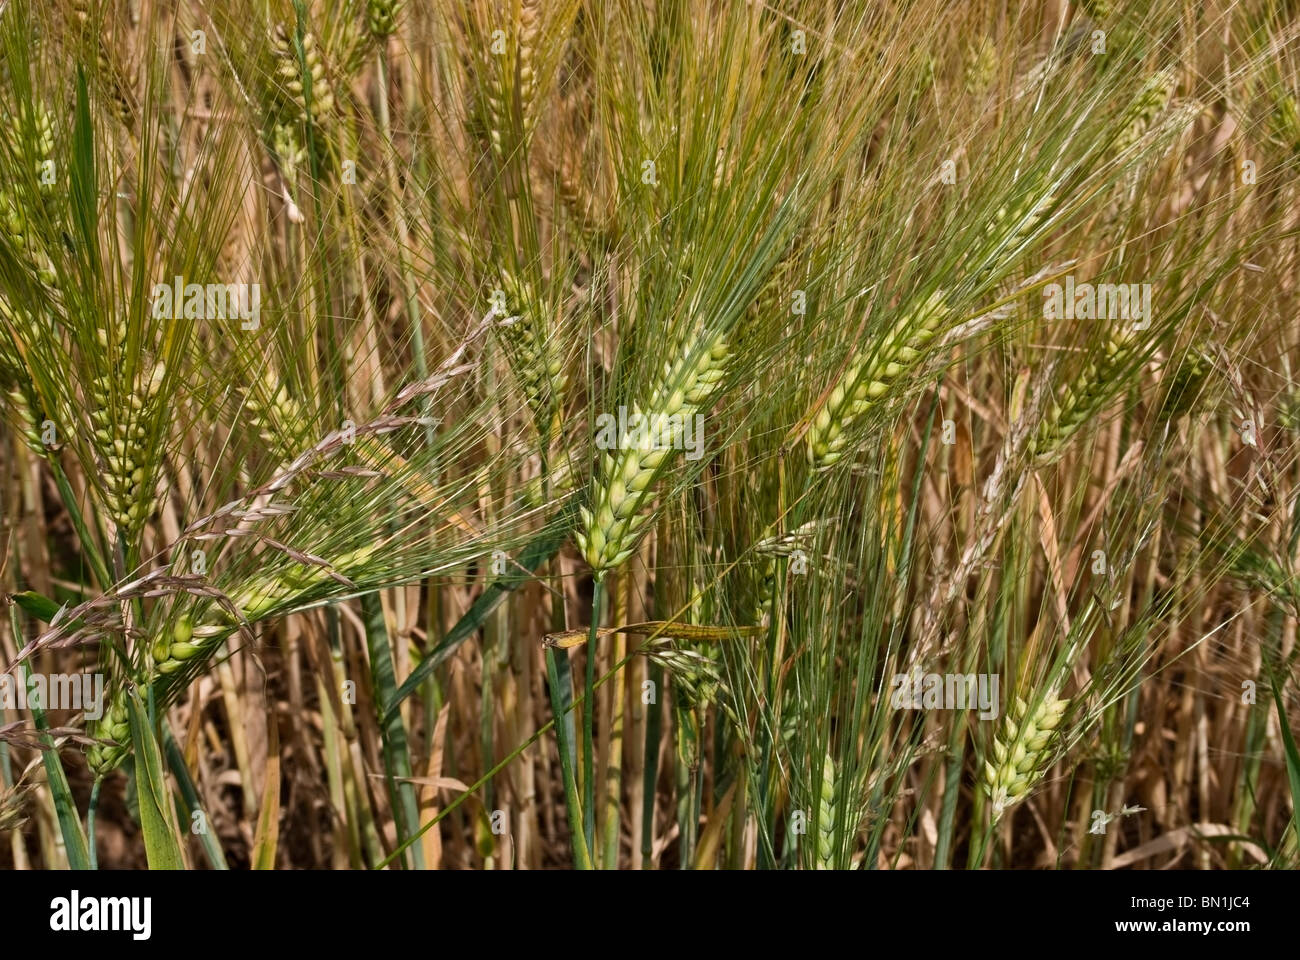 Landscape photograph of a durum wheat field in Giessen, Germany Stock Photo